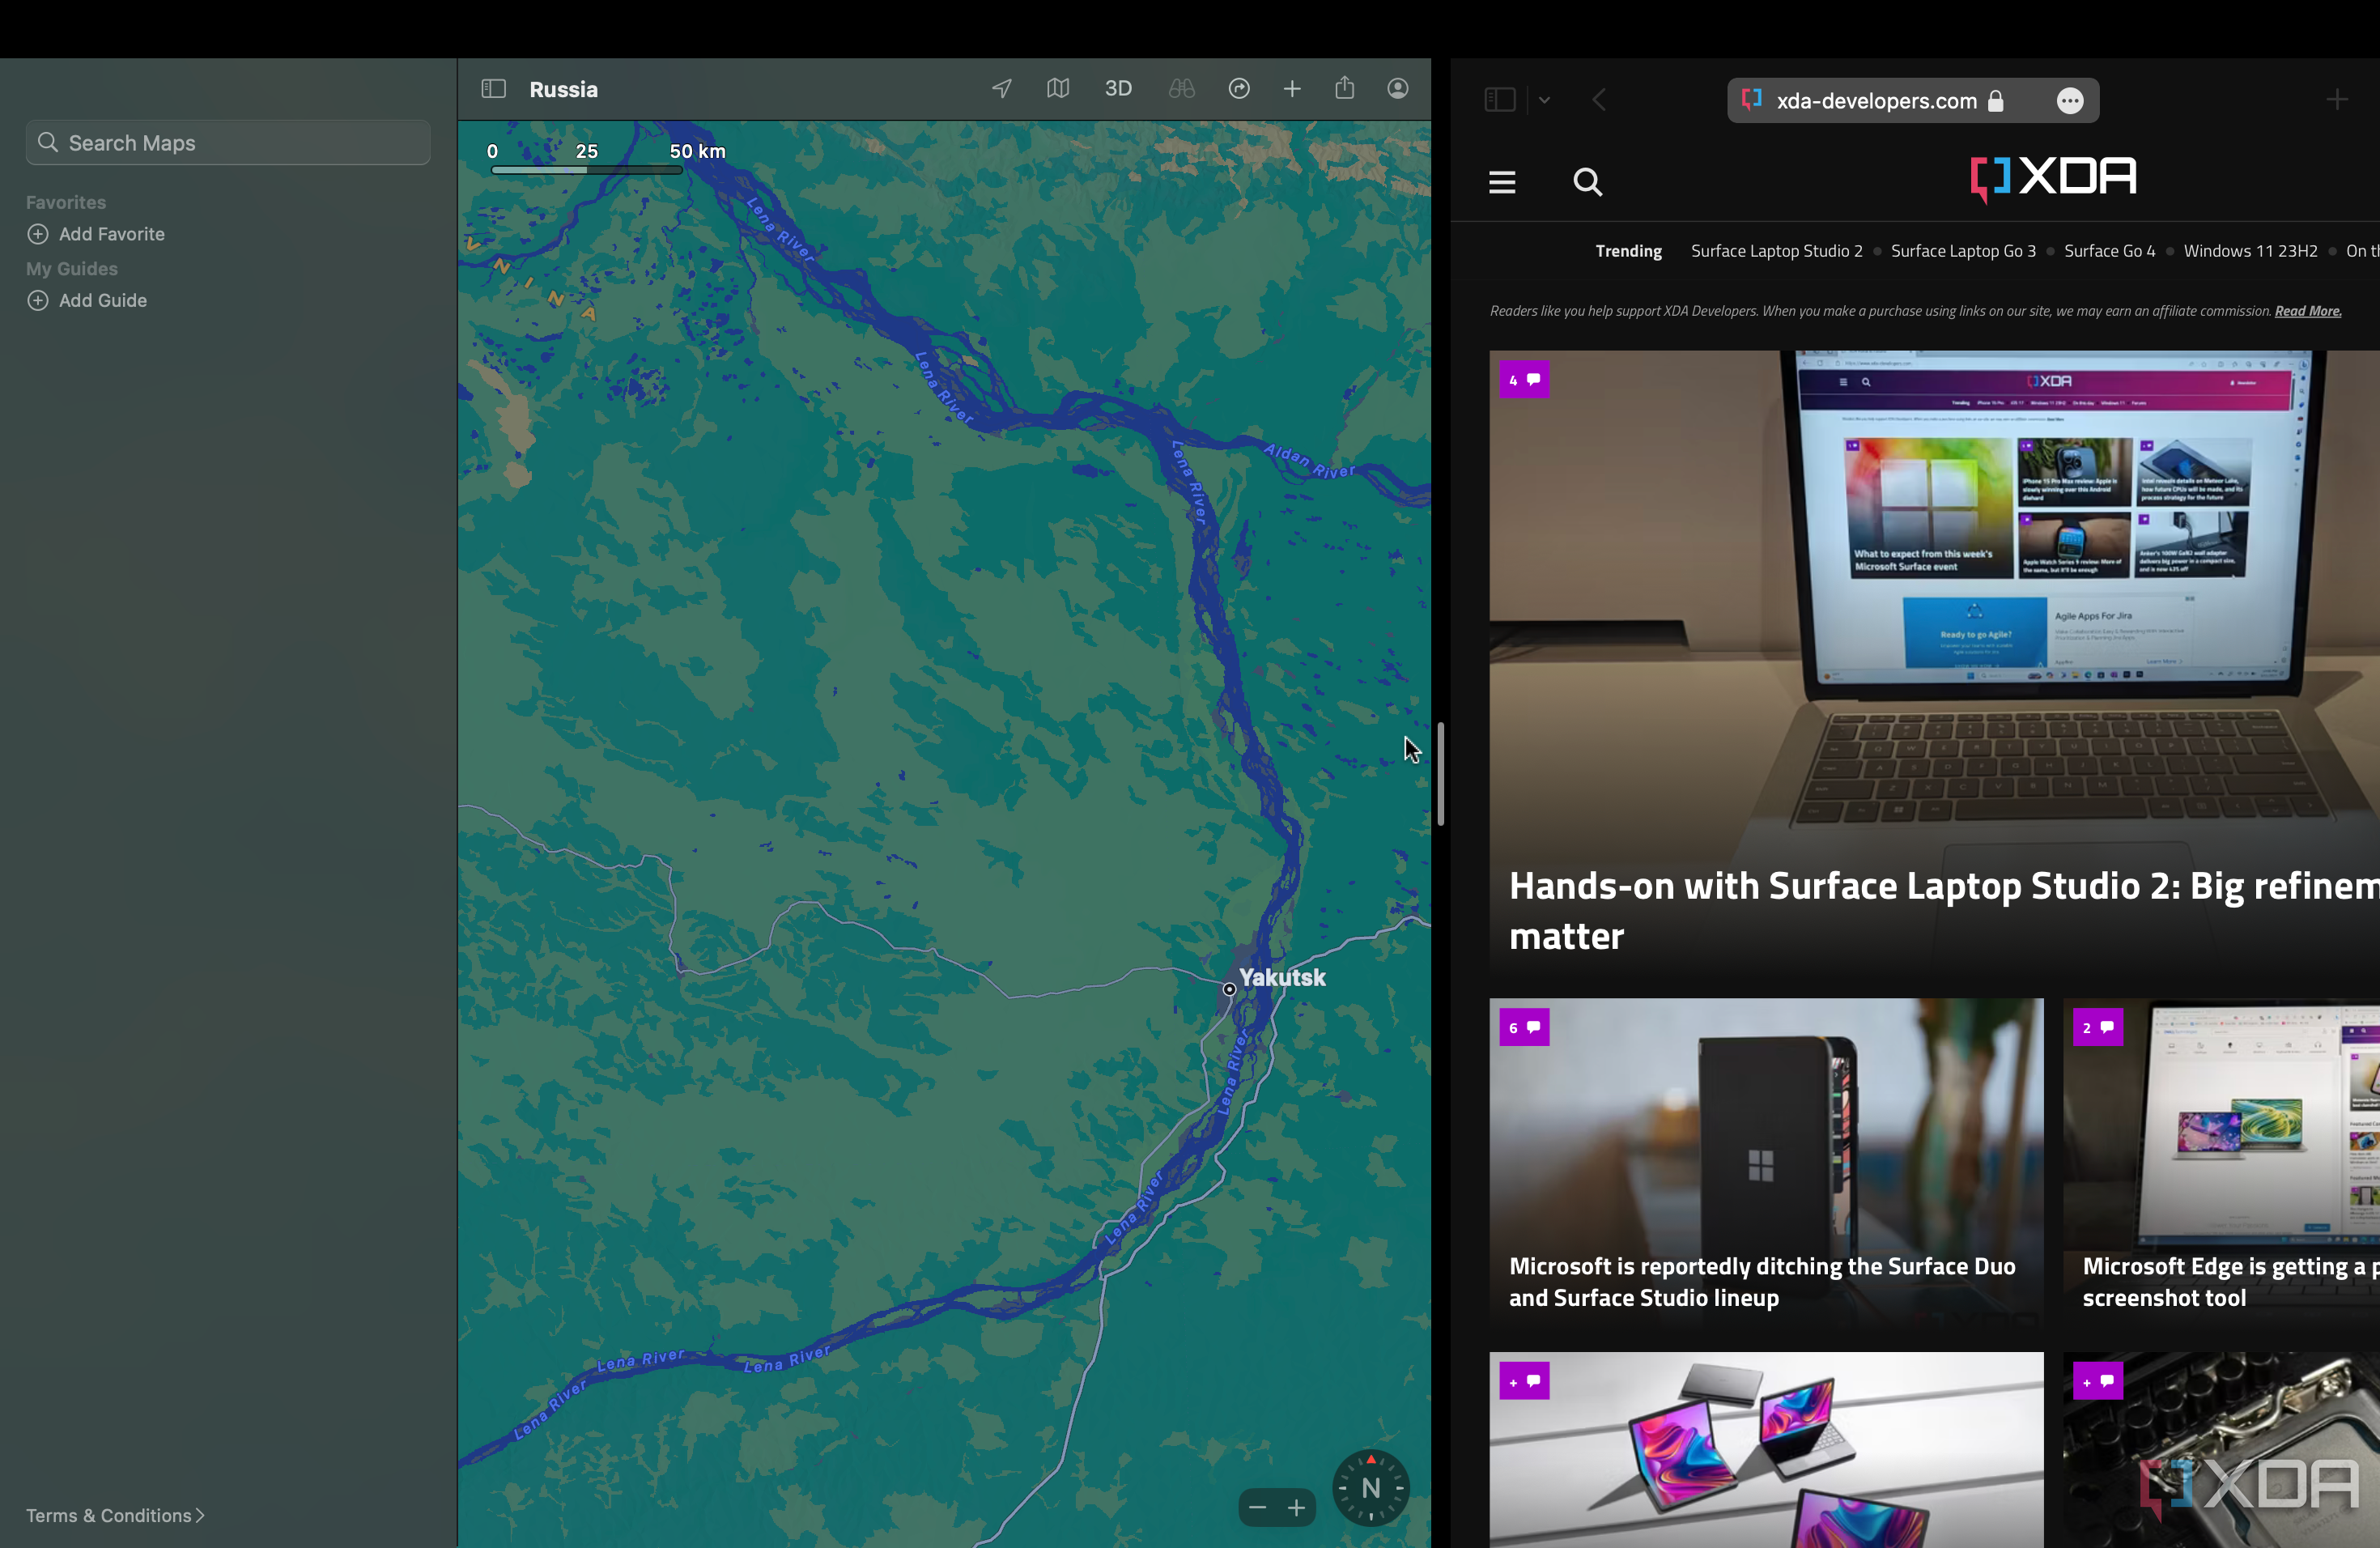 giving the maps app more space by dragging the gray dash in the center